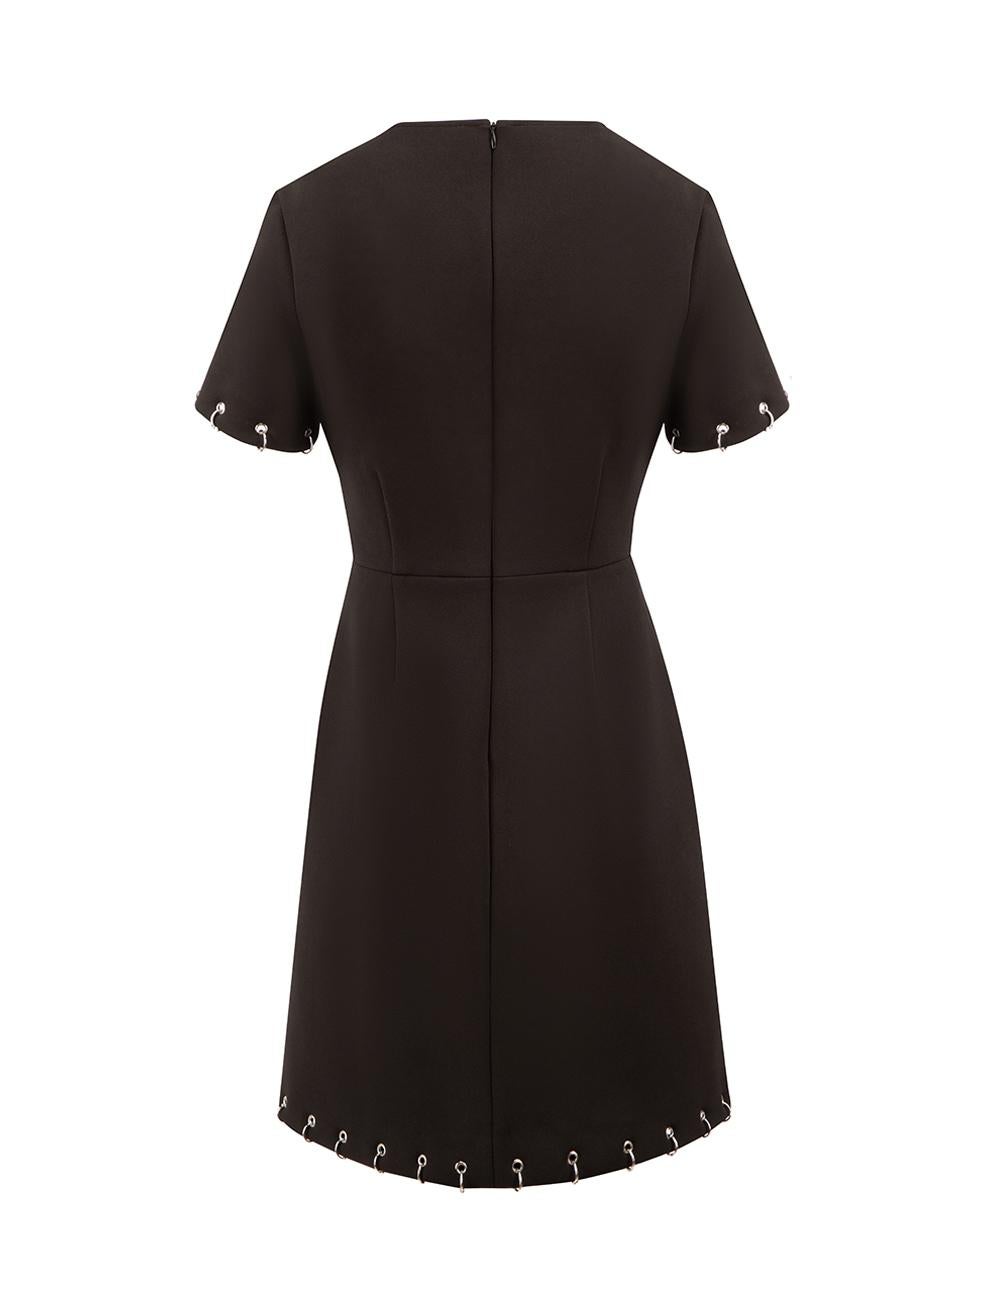 Black Ring Detail Mini Dress Size M In Good Condition For Sale In London, GB